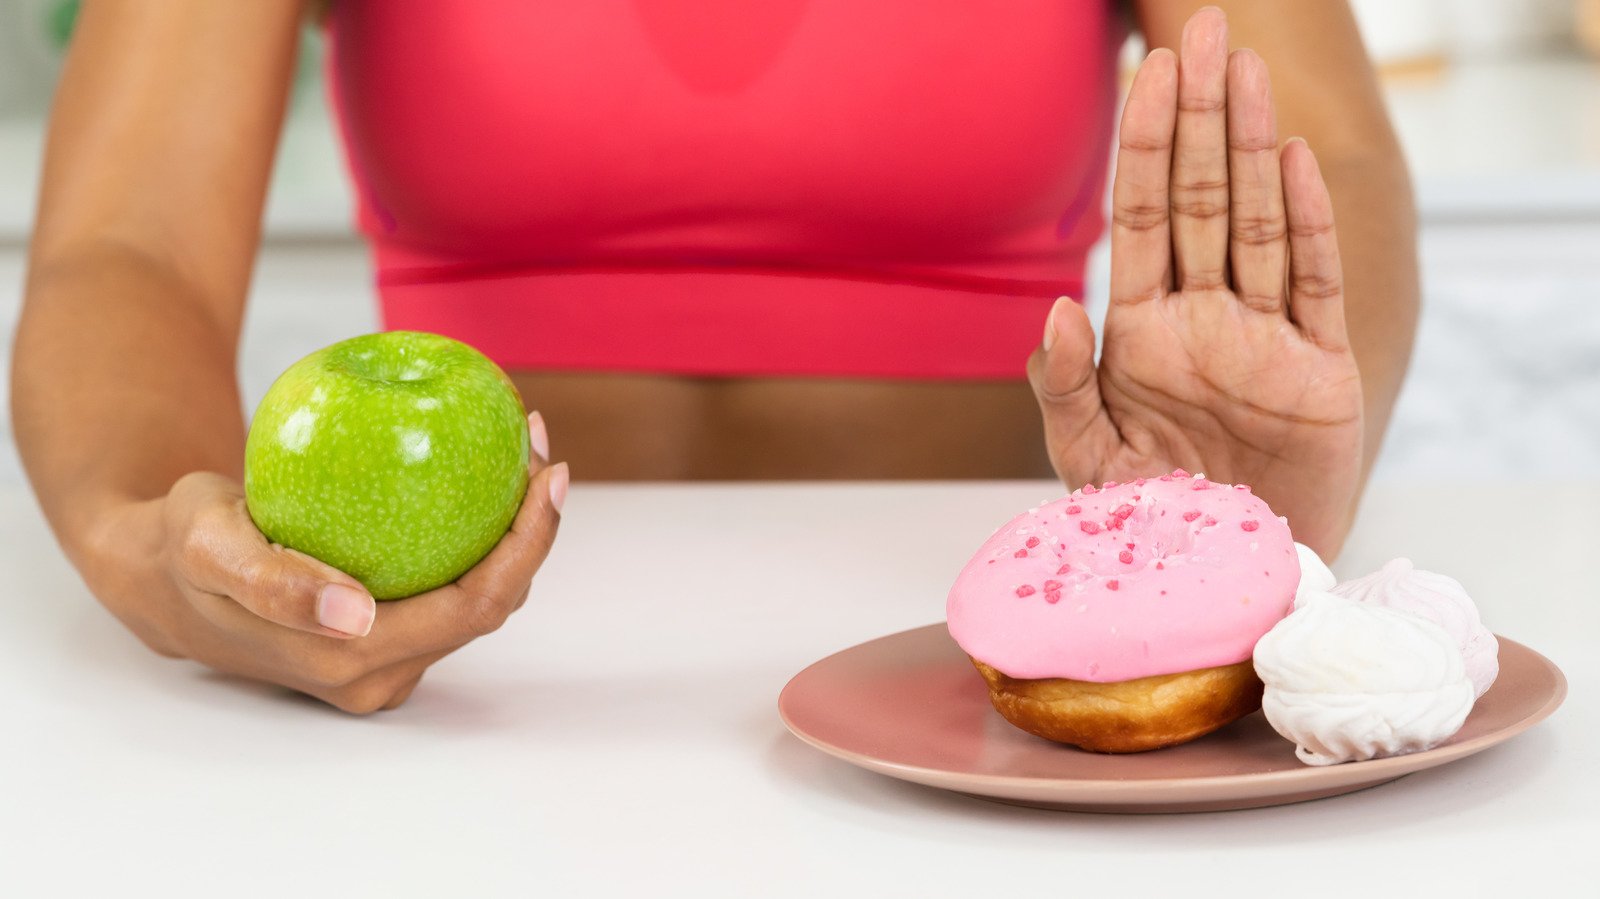 When You Stop Eating Sugar, This Is What Happens To Your Body